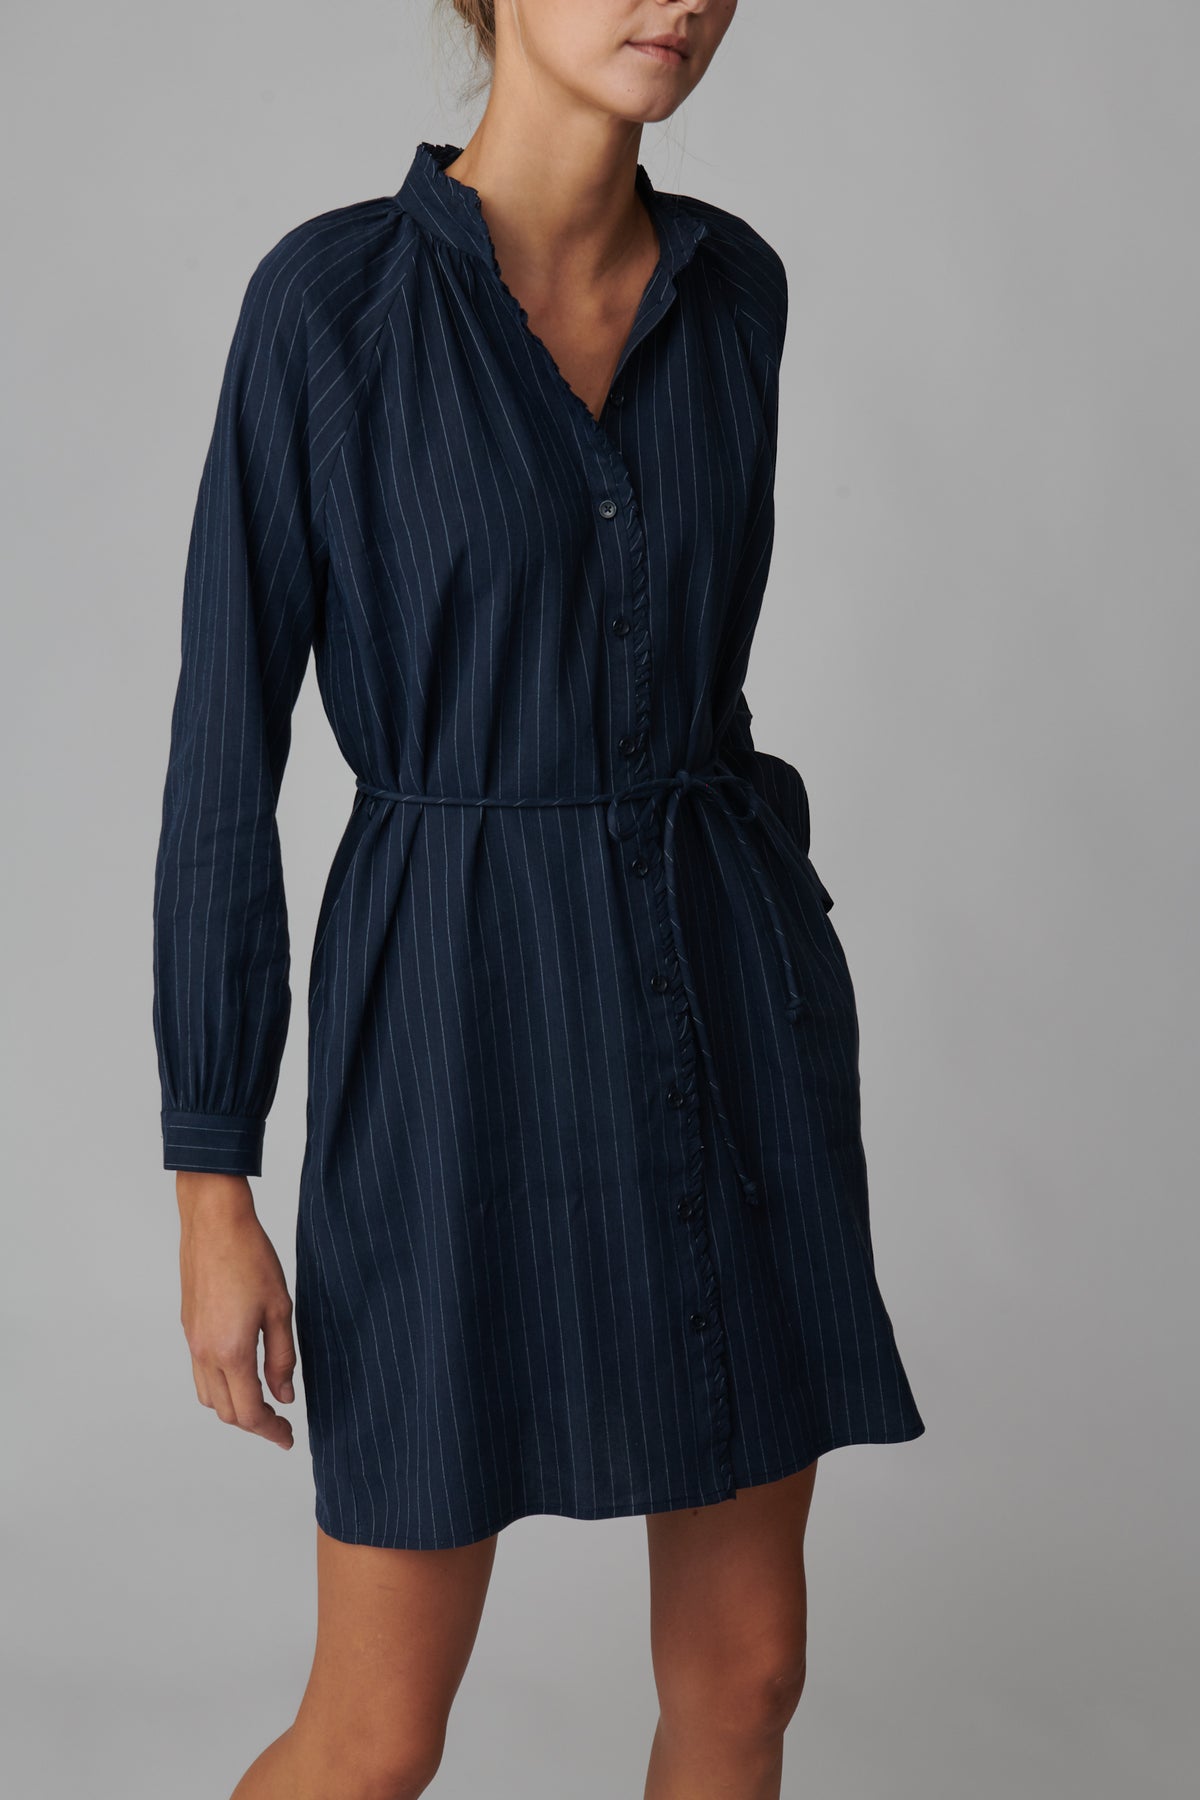 Emeline is 5'11 and wears a size S in navy pinstripe